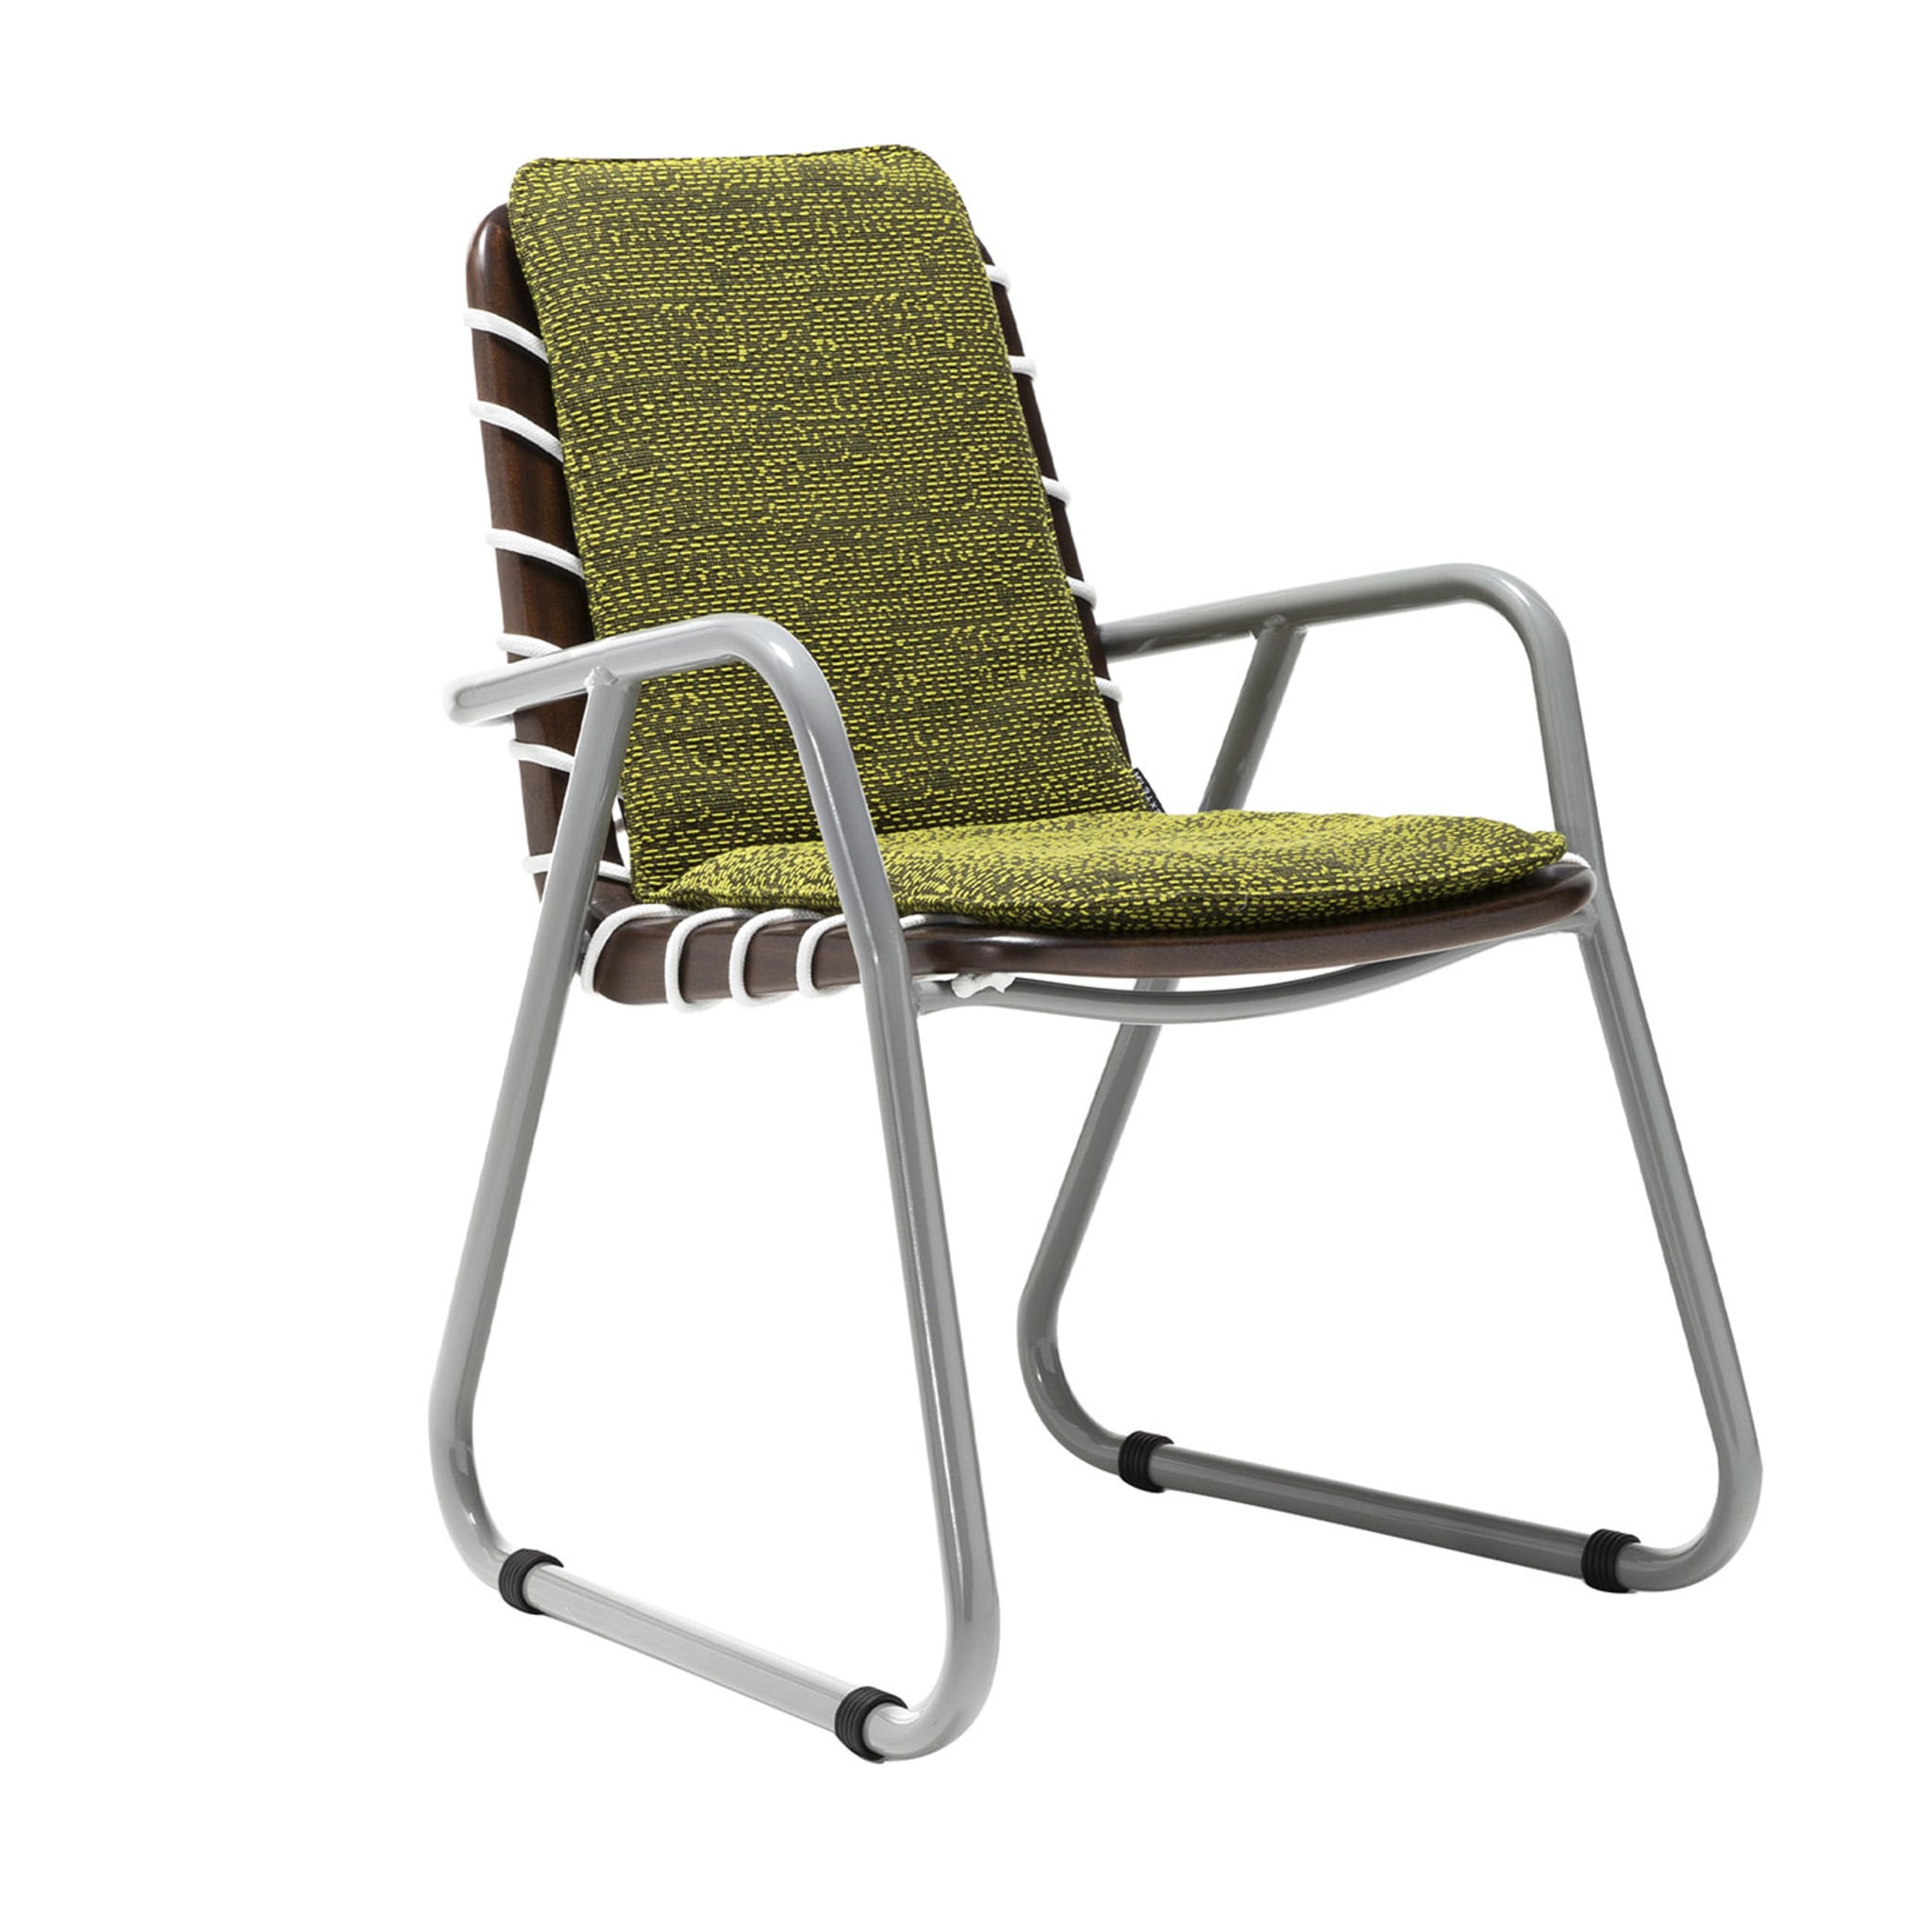 Sunset Green Dining Armchair by Paola Navone - Main view